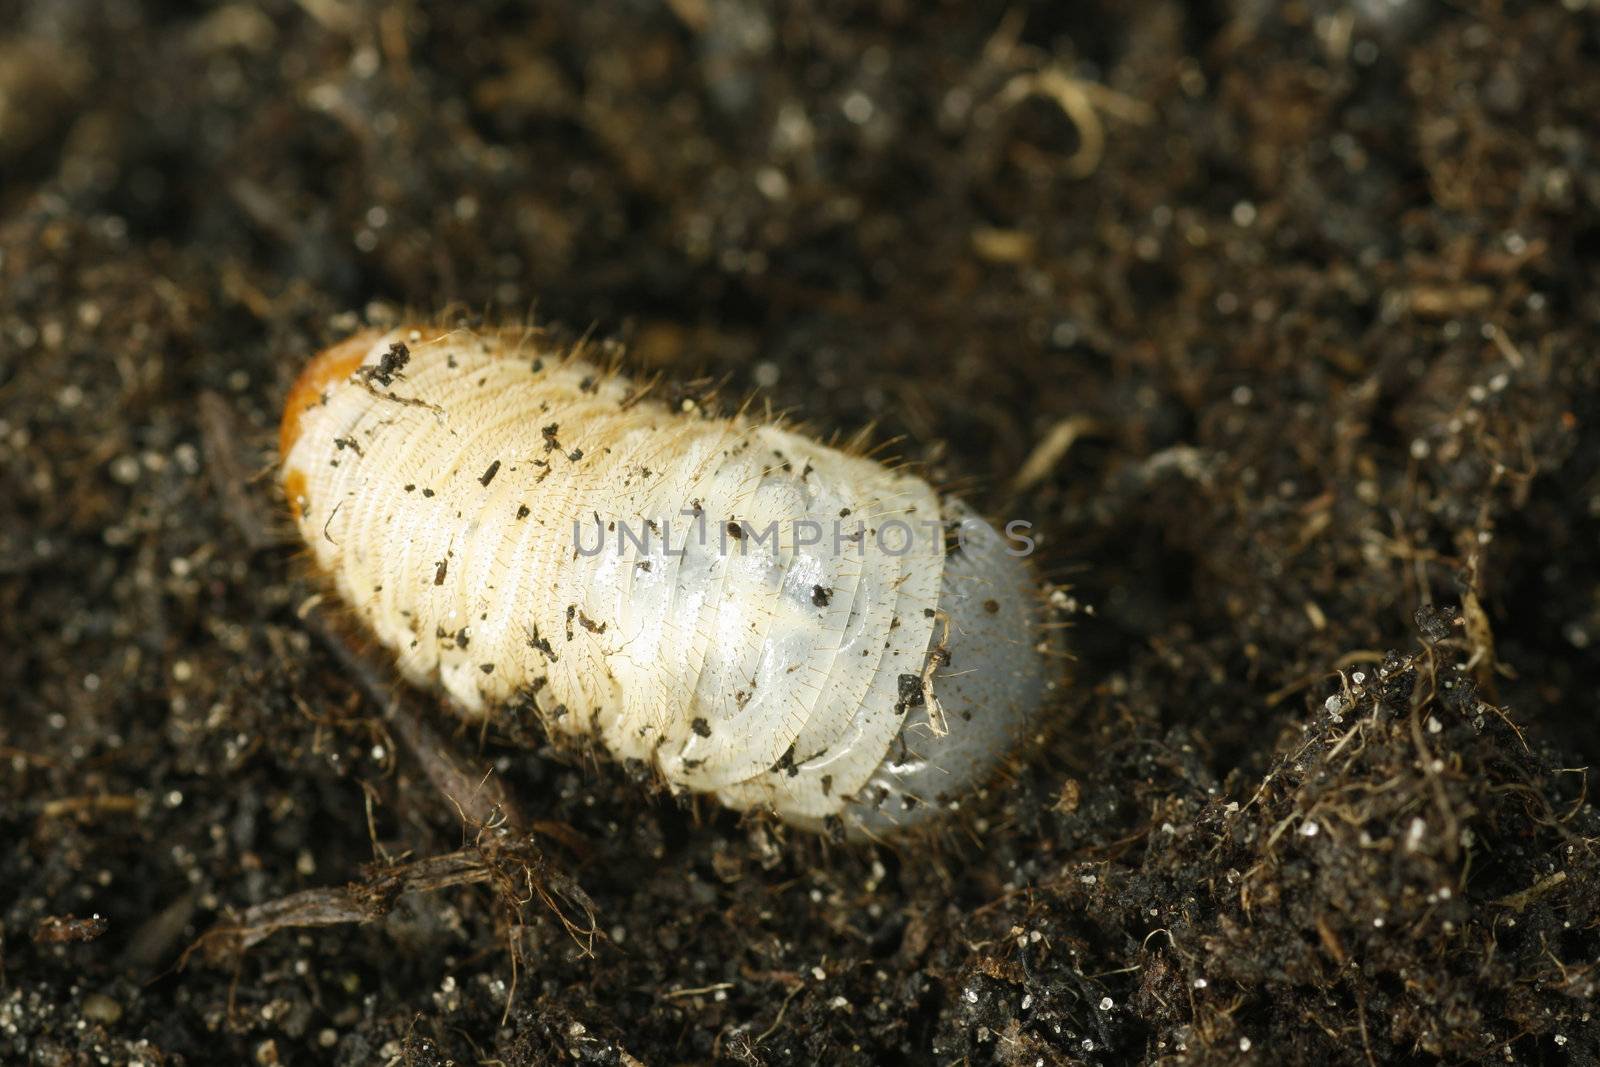 Close-up of a cockchafer grub on soil